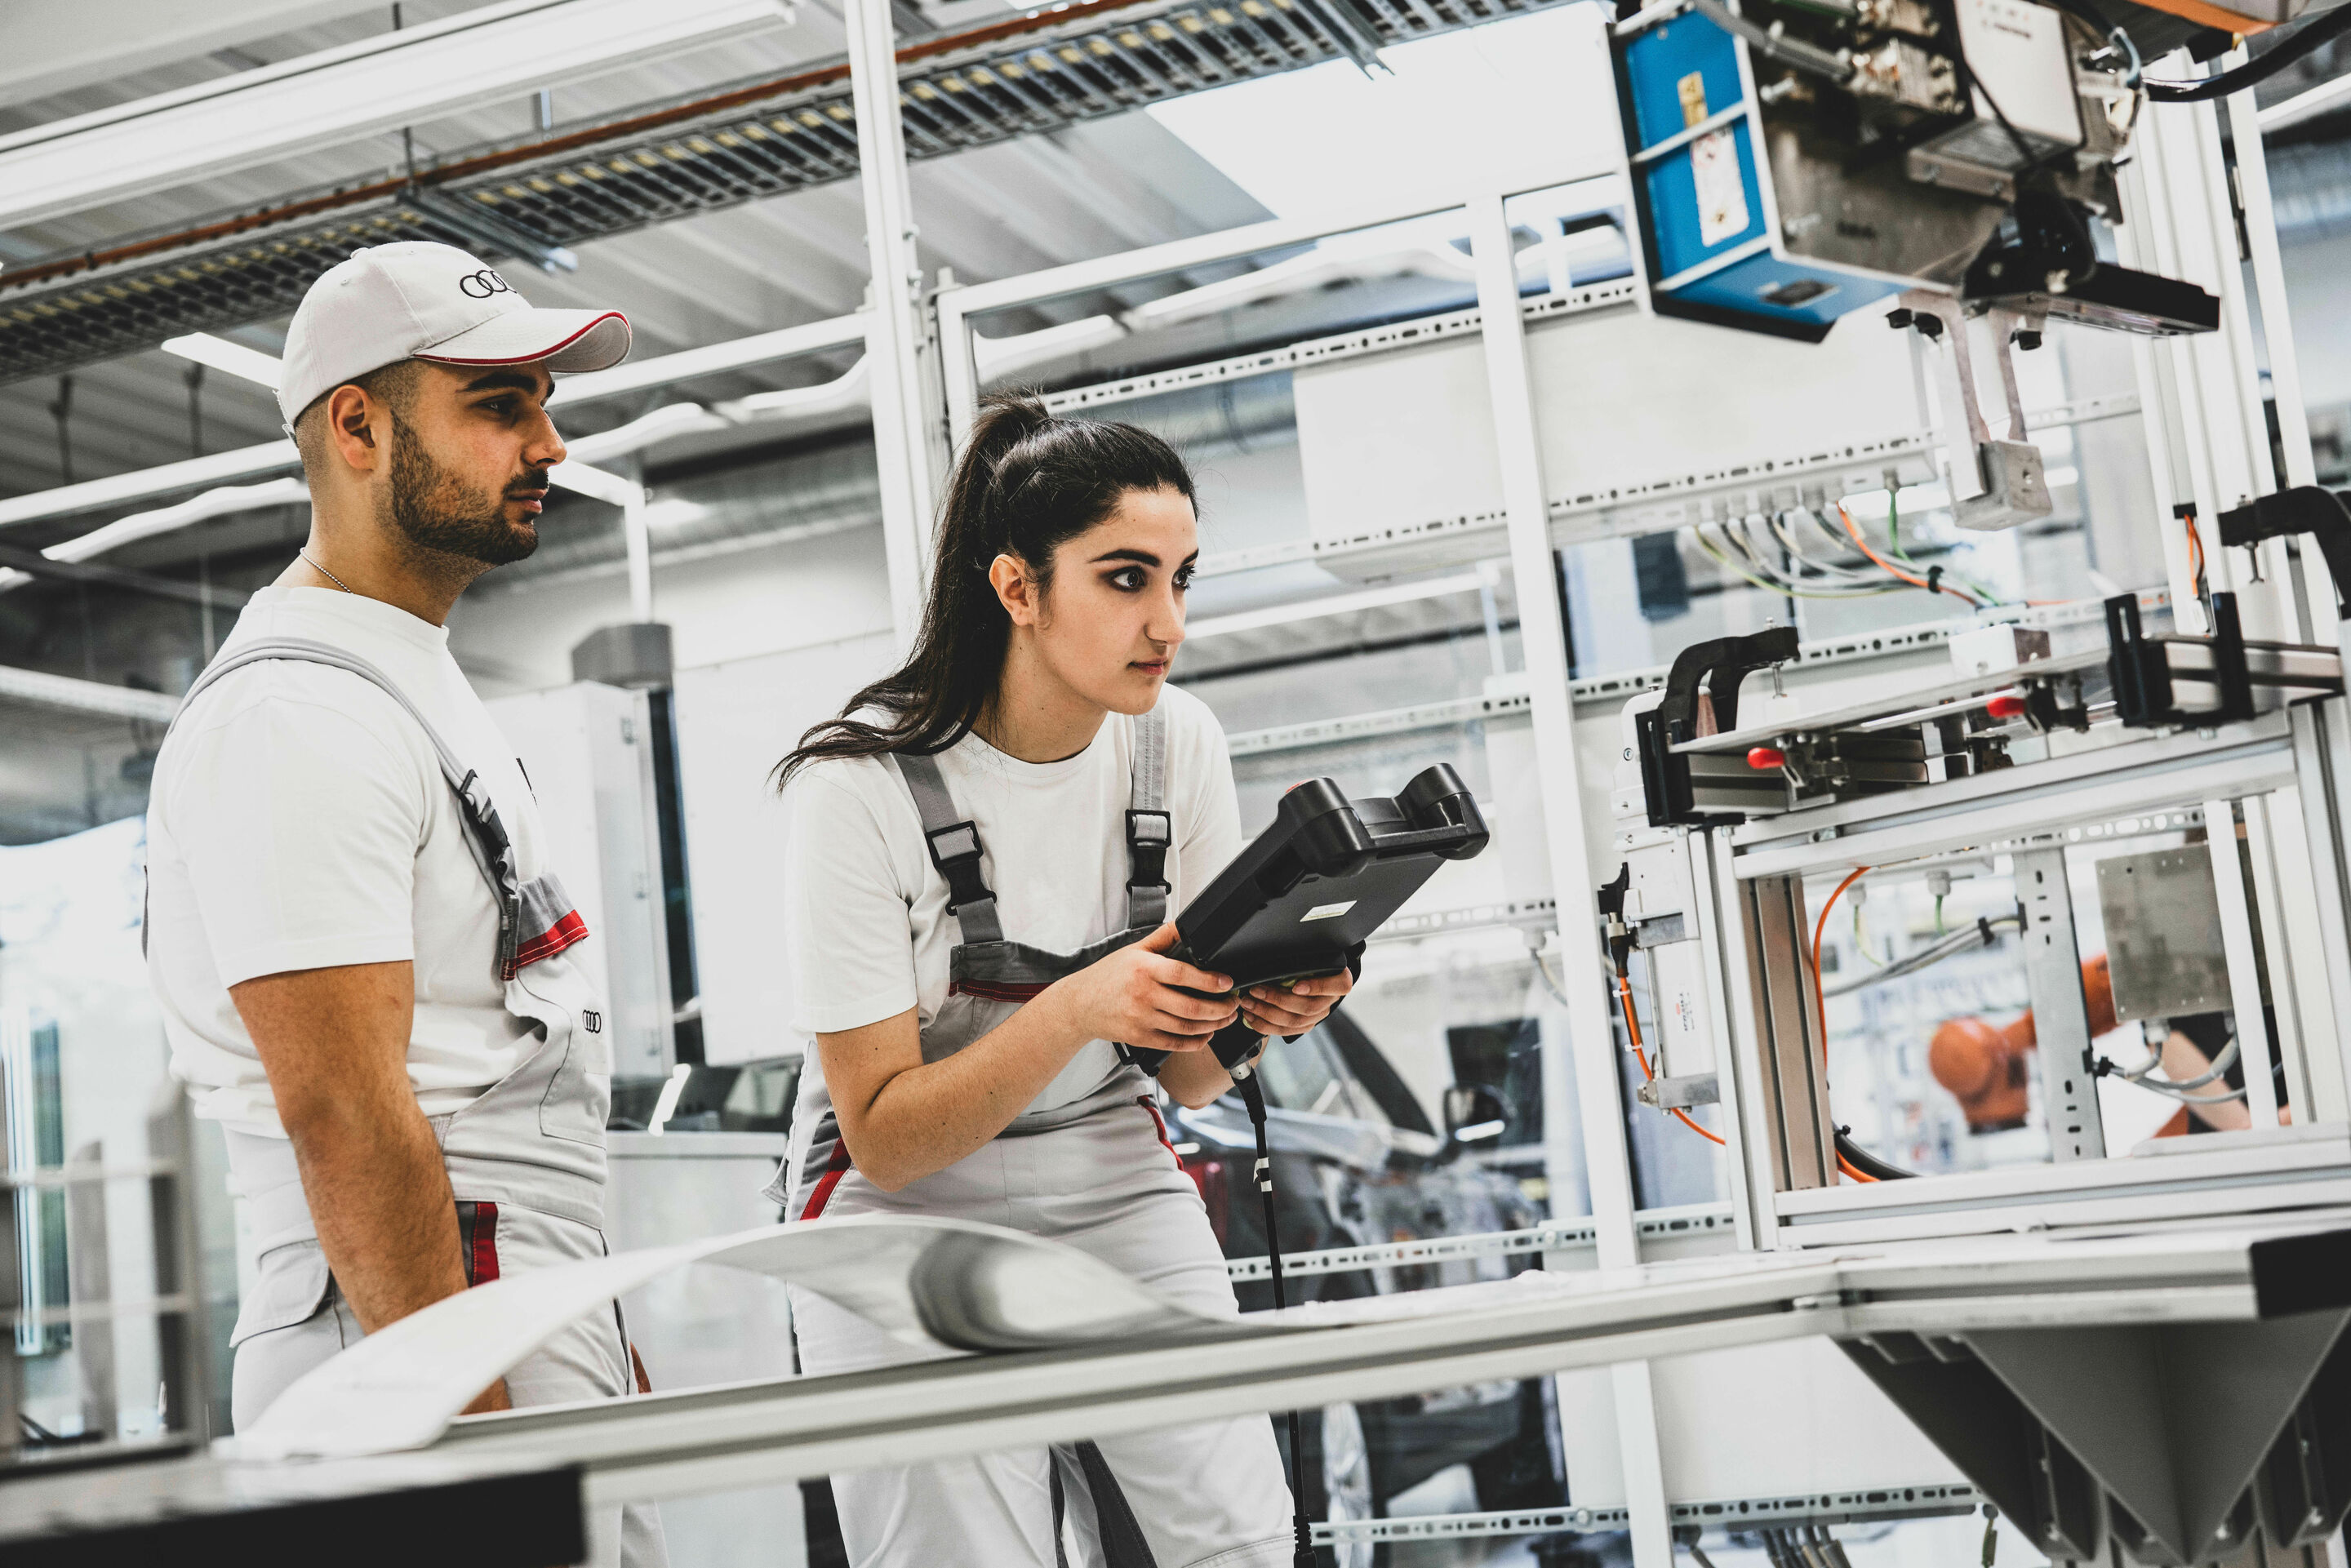 Audi is taking a value-based approach to the transformation of the world of work, positioning the company successfully in the race for top talent as an attractive and modern employer.